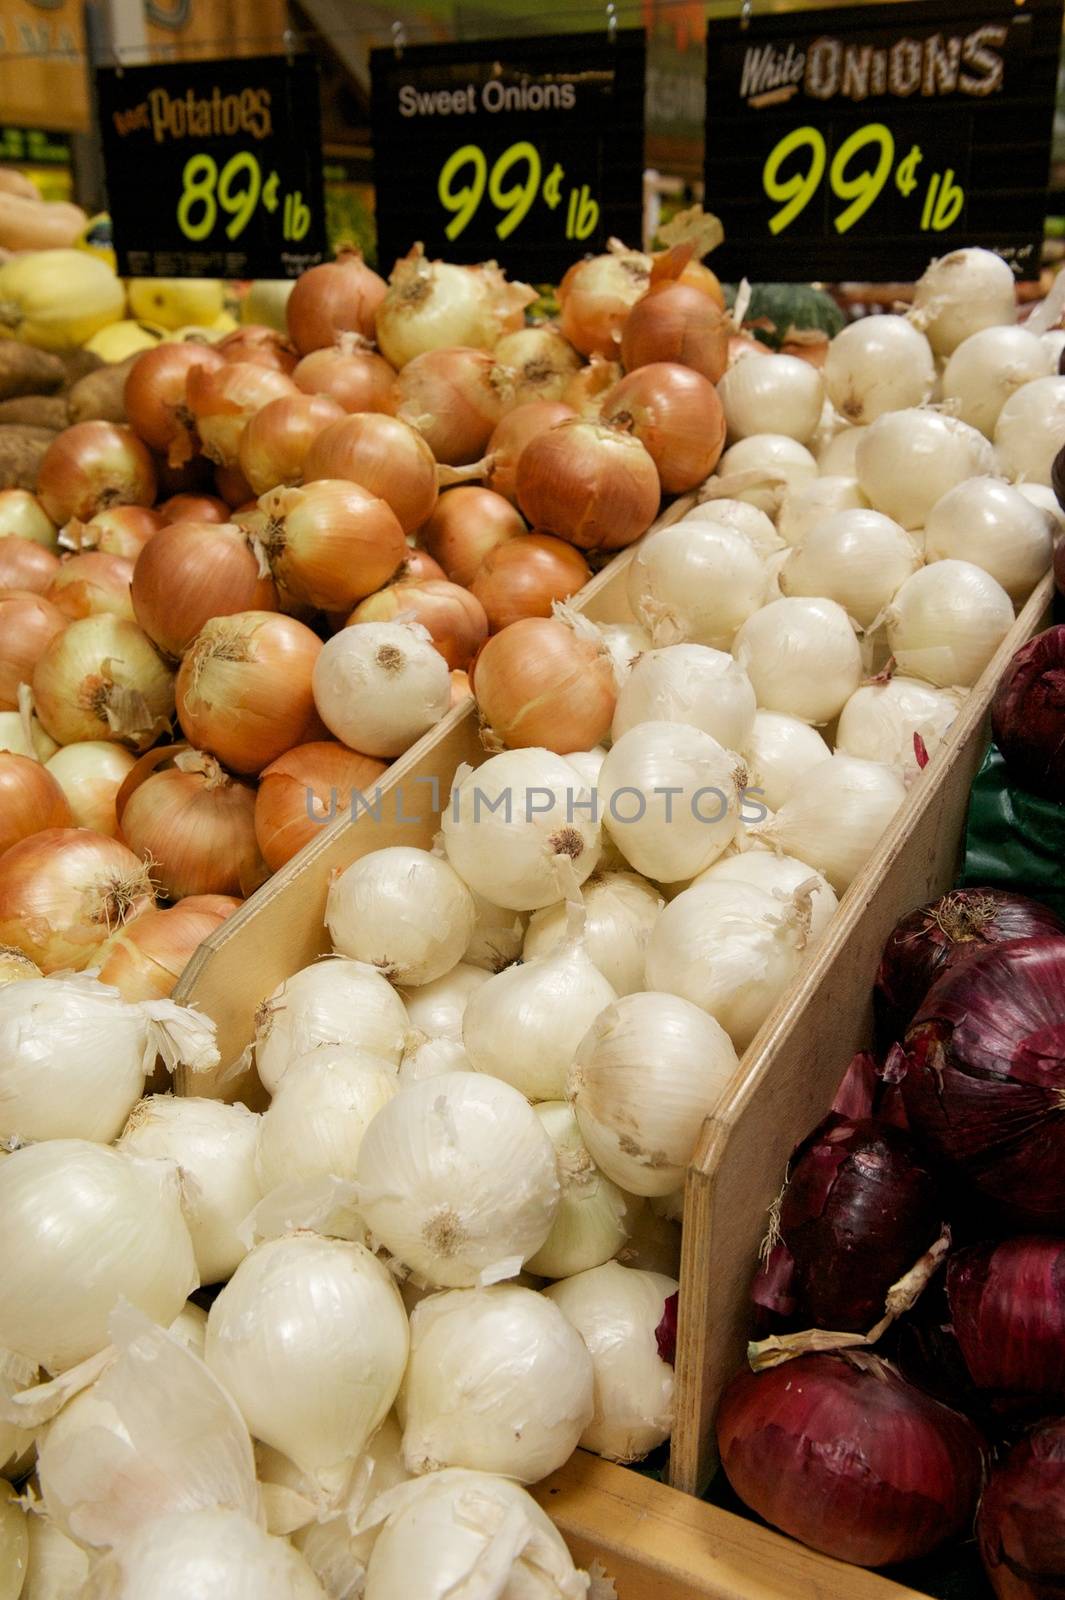 Wooden grocery store bins full of White, Yellow and Red Onions with signs listing their prices